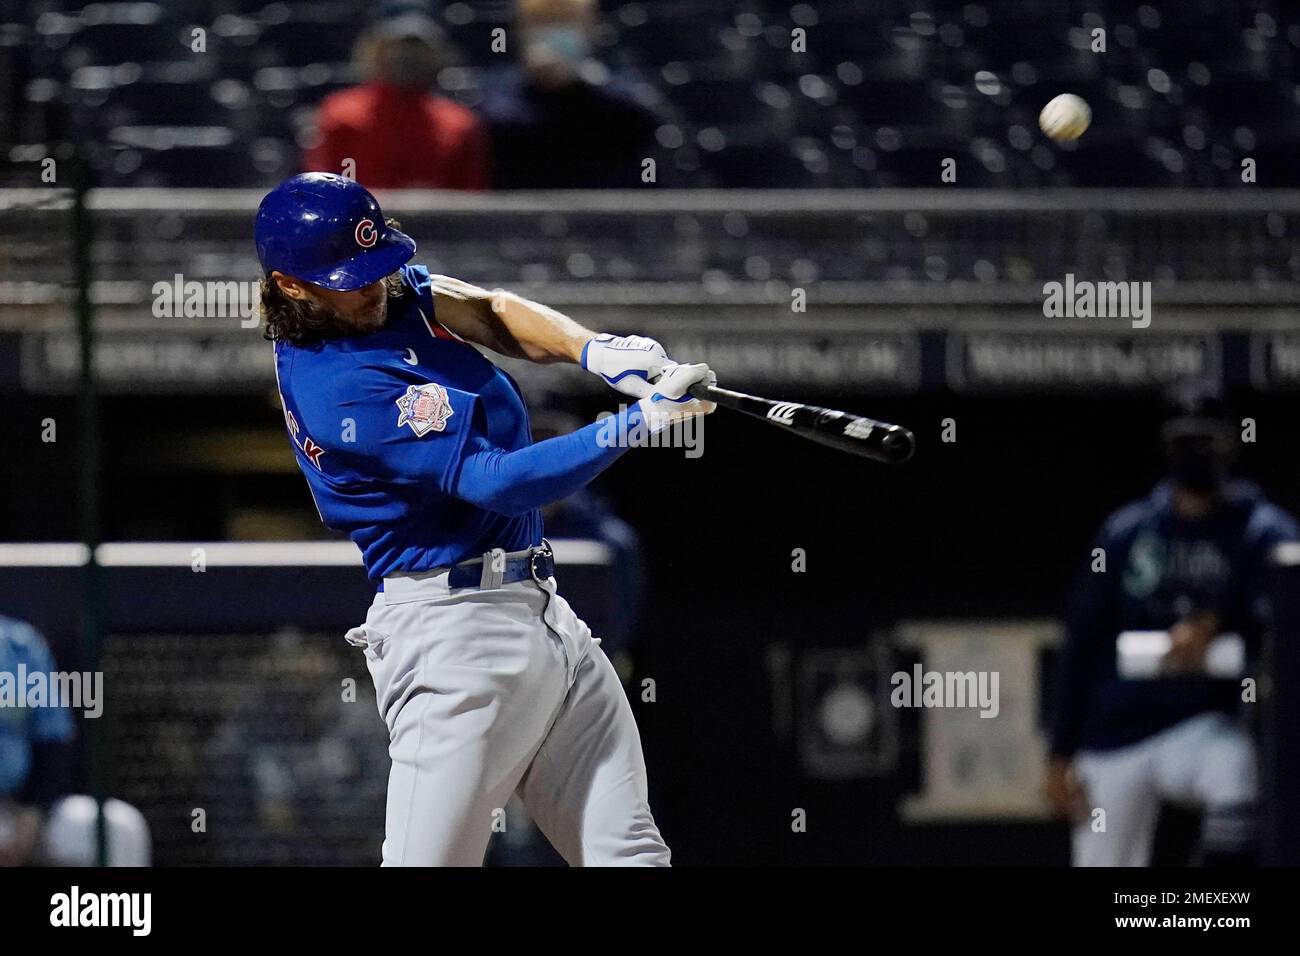 This is a 2021 photo of Jake Marisnick of the Chicago Cubs baseball team.  This image reflects the Chicago Cubs active roster as of Tuesday, Feb. 23,  2021 when this image was